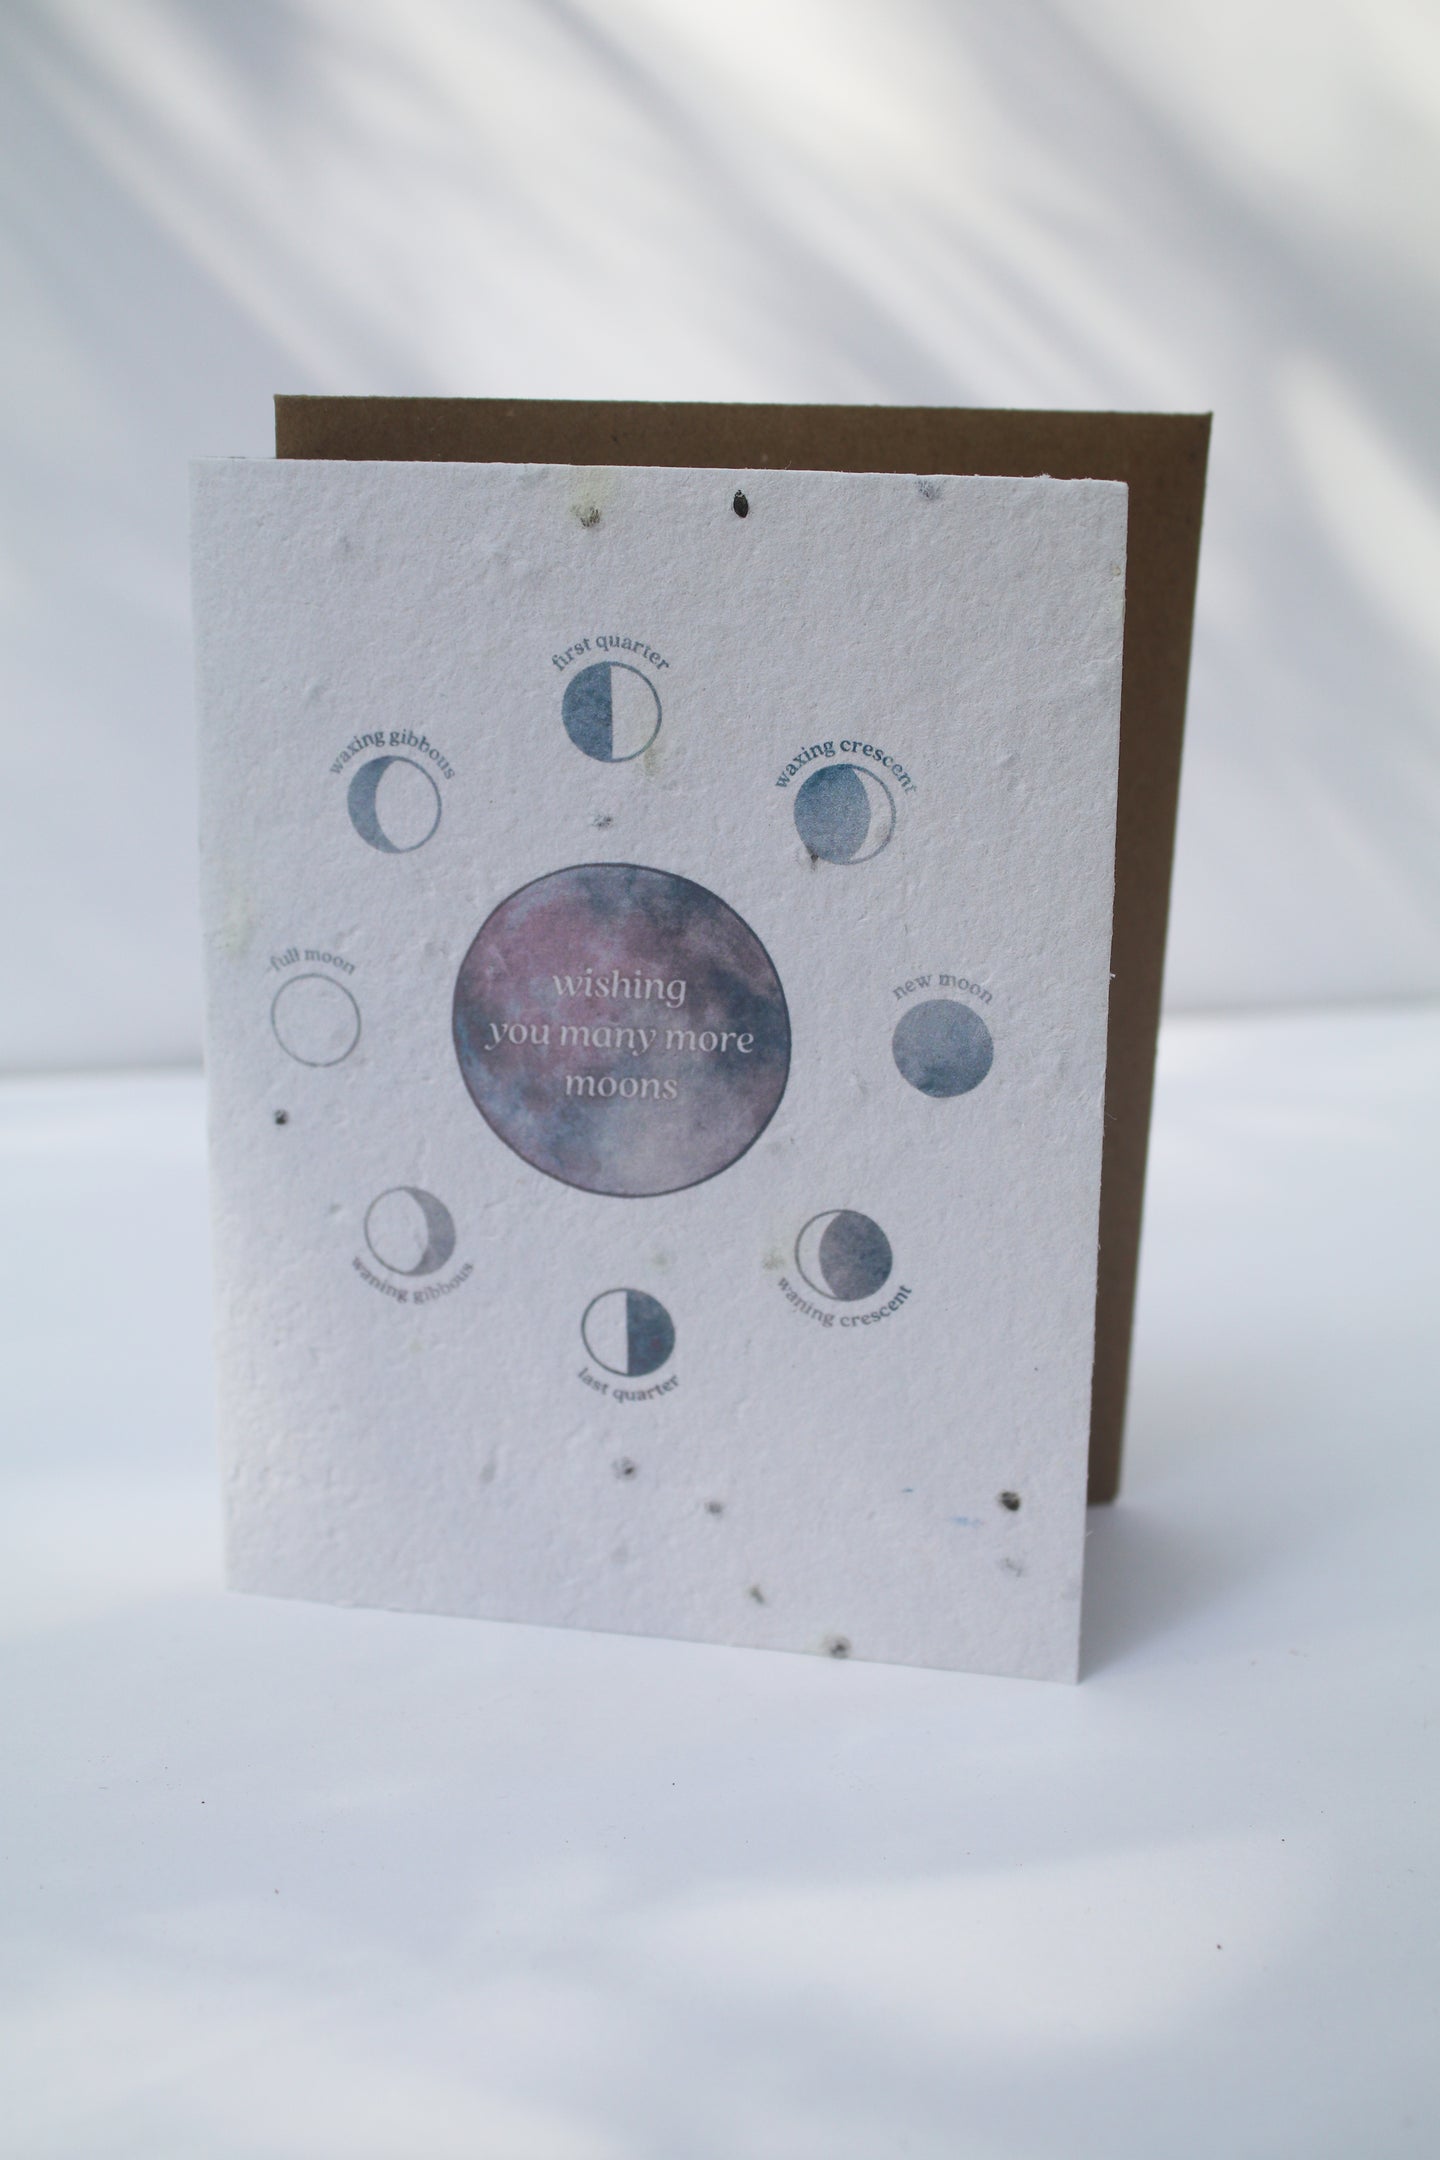 a plantable seed card - the card has a textured look from the seeds imbedded in the paper. There is a drawing of the moon phases on the card in an indigo color. The moon phases are surrounding one large moon in the center that reads 